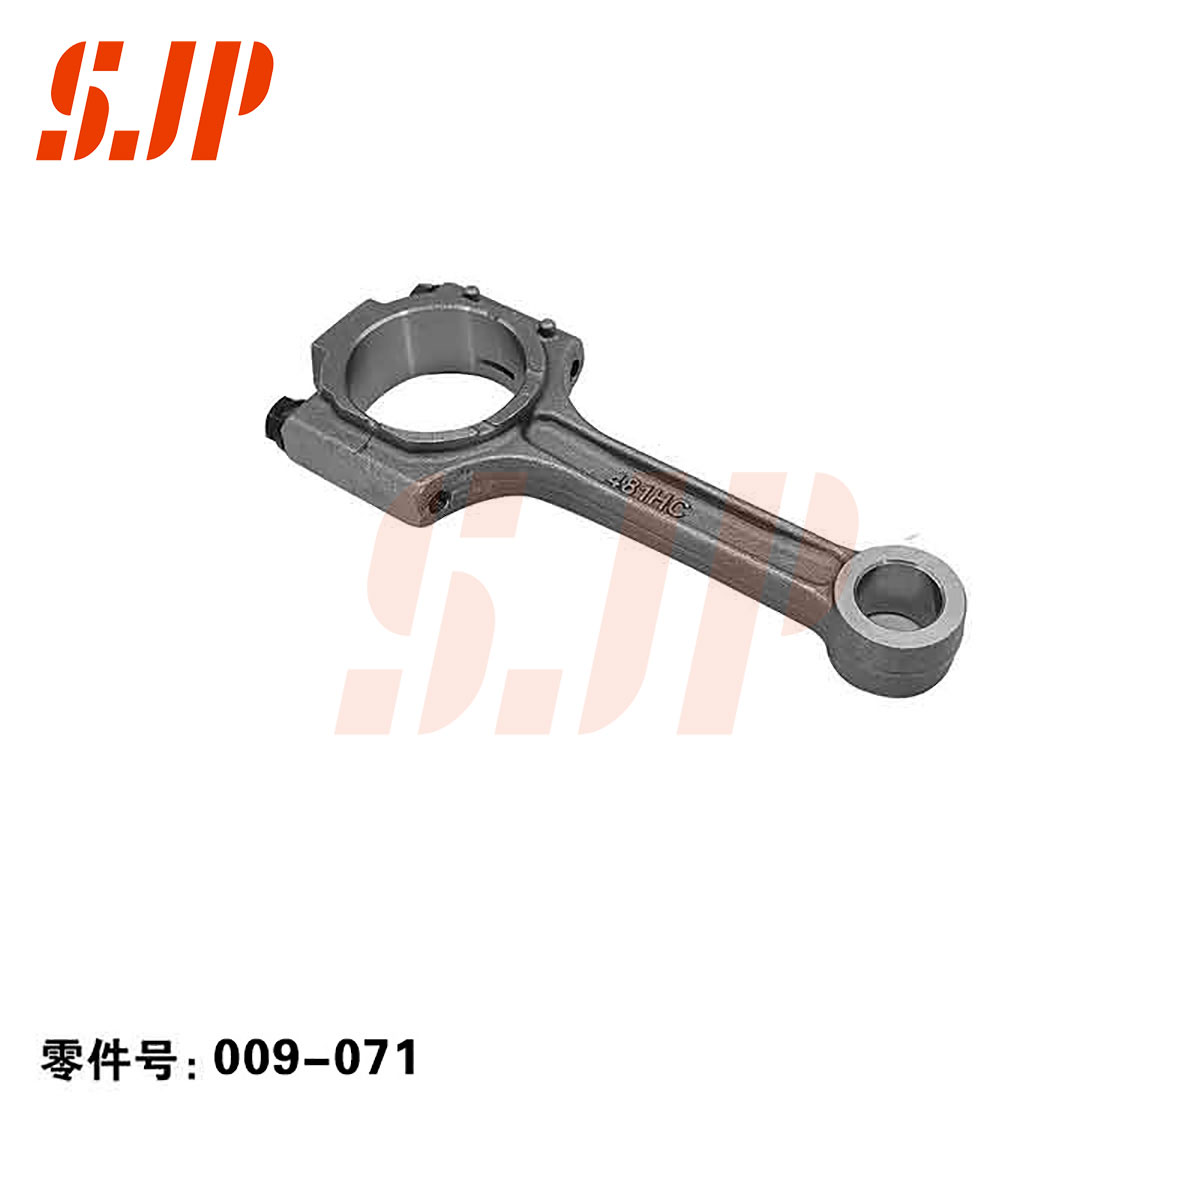 SJ-009-071 Connecting Rod For Chery 481/484/Without Copper Sleeve